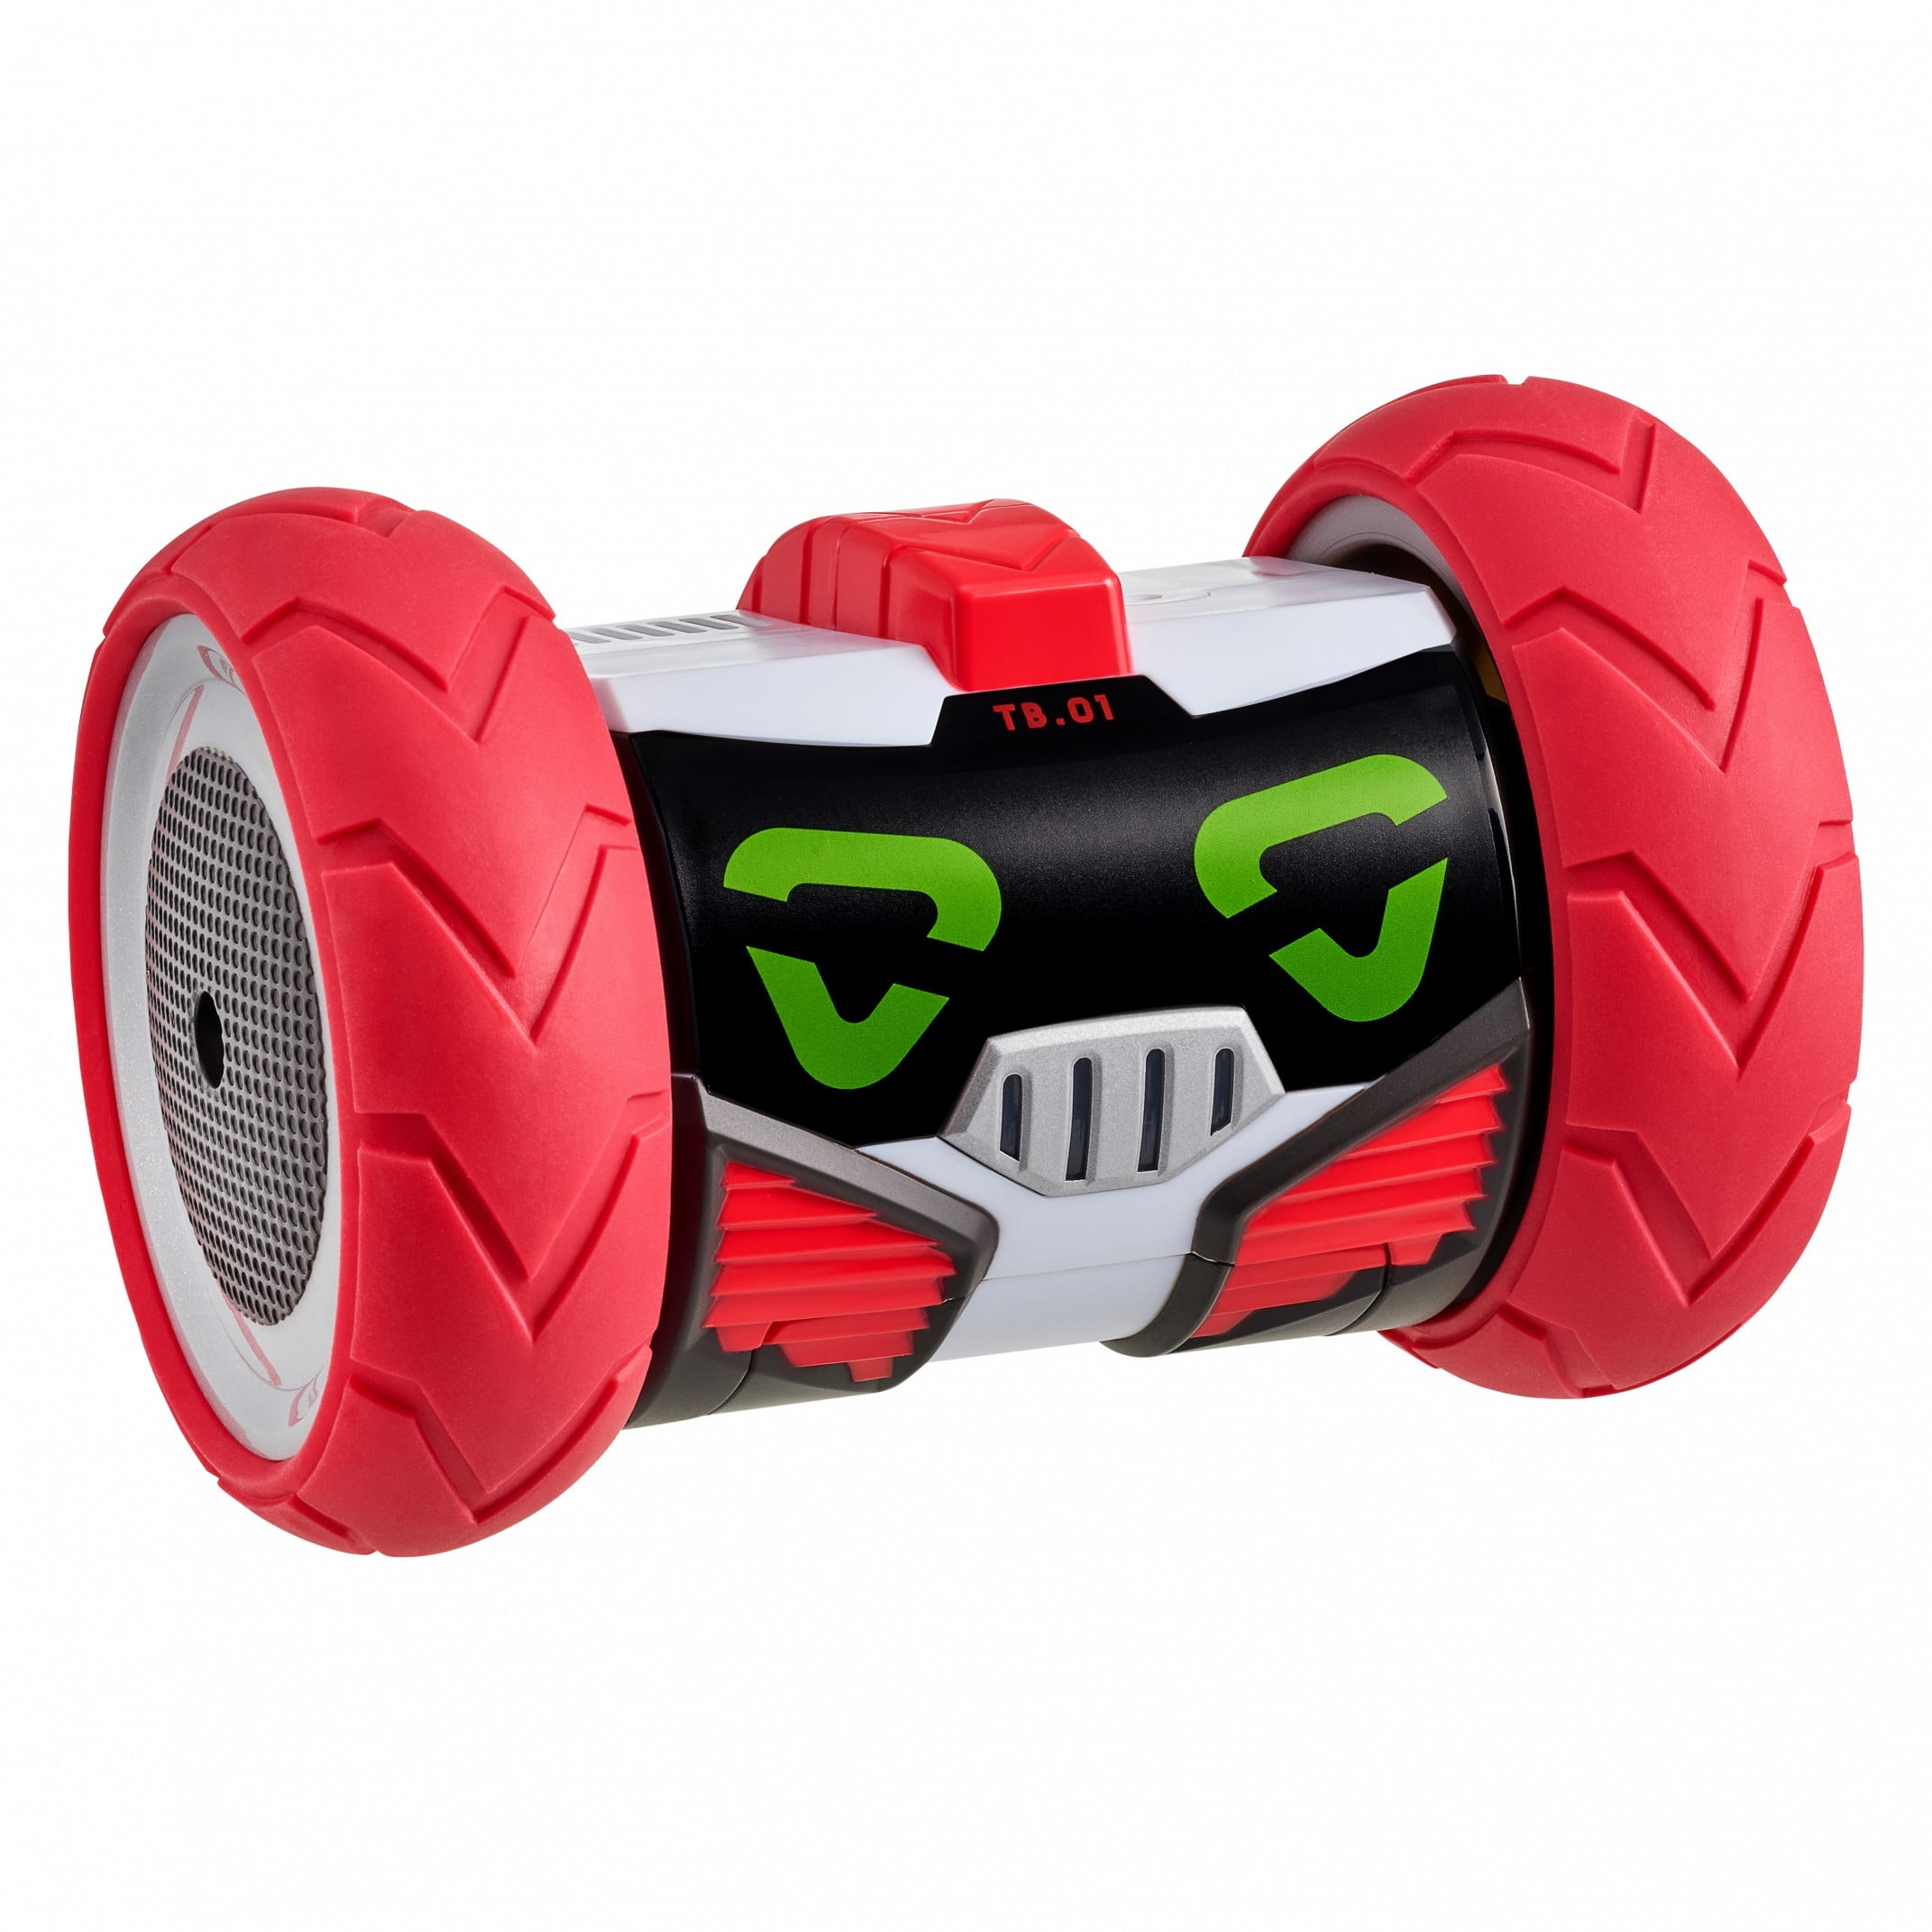 Really Rad Robots 27850 Turbo Bot Toy for sale online 